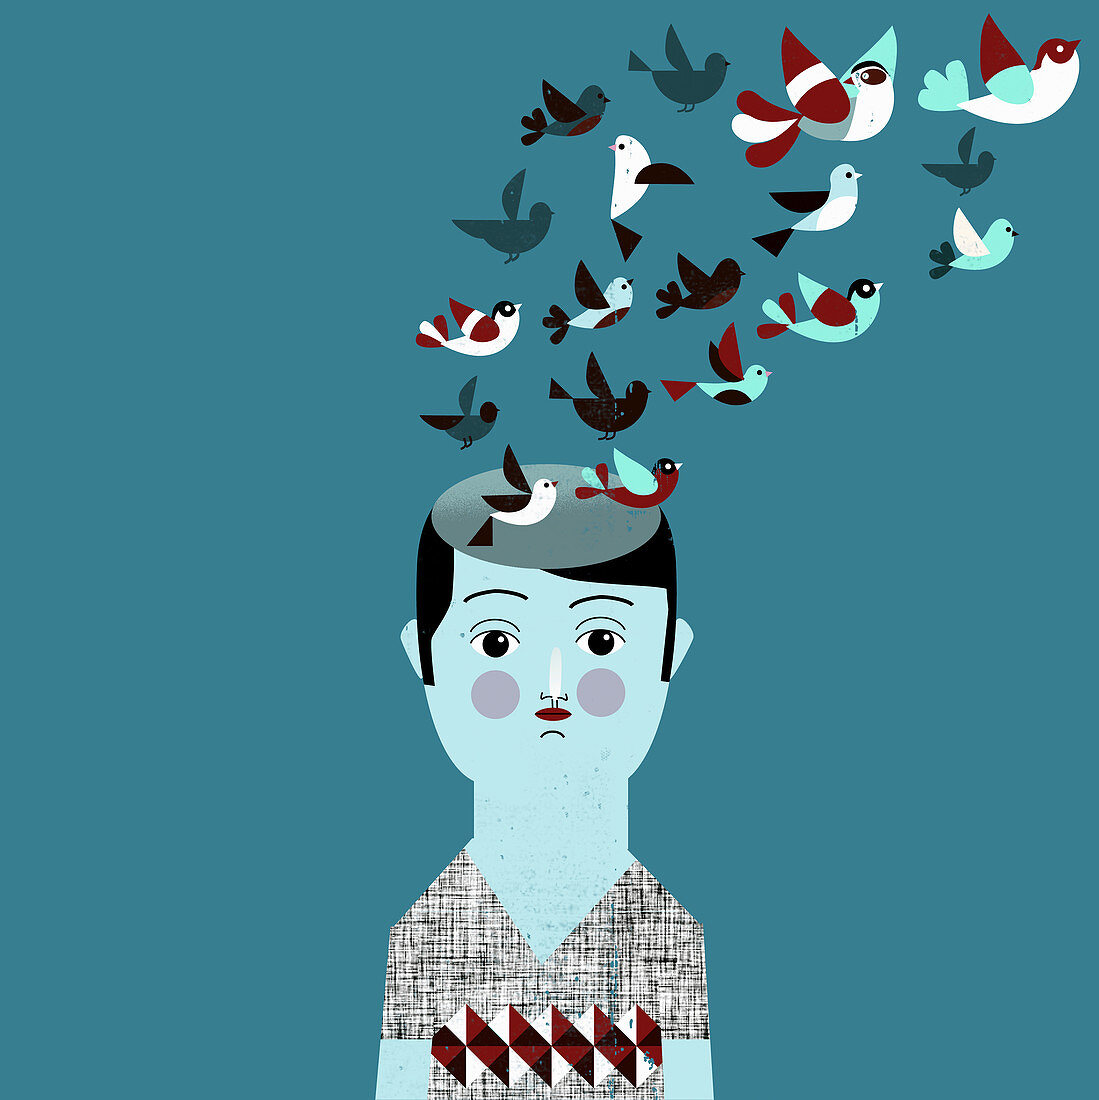 Man with flock of birds coming from head, illustration